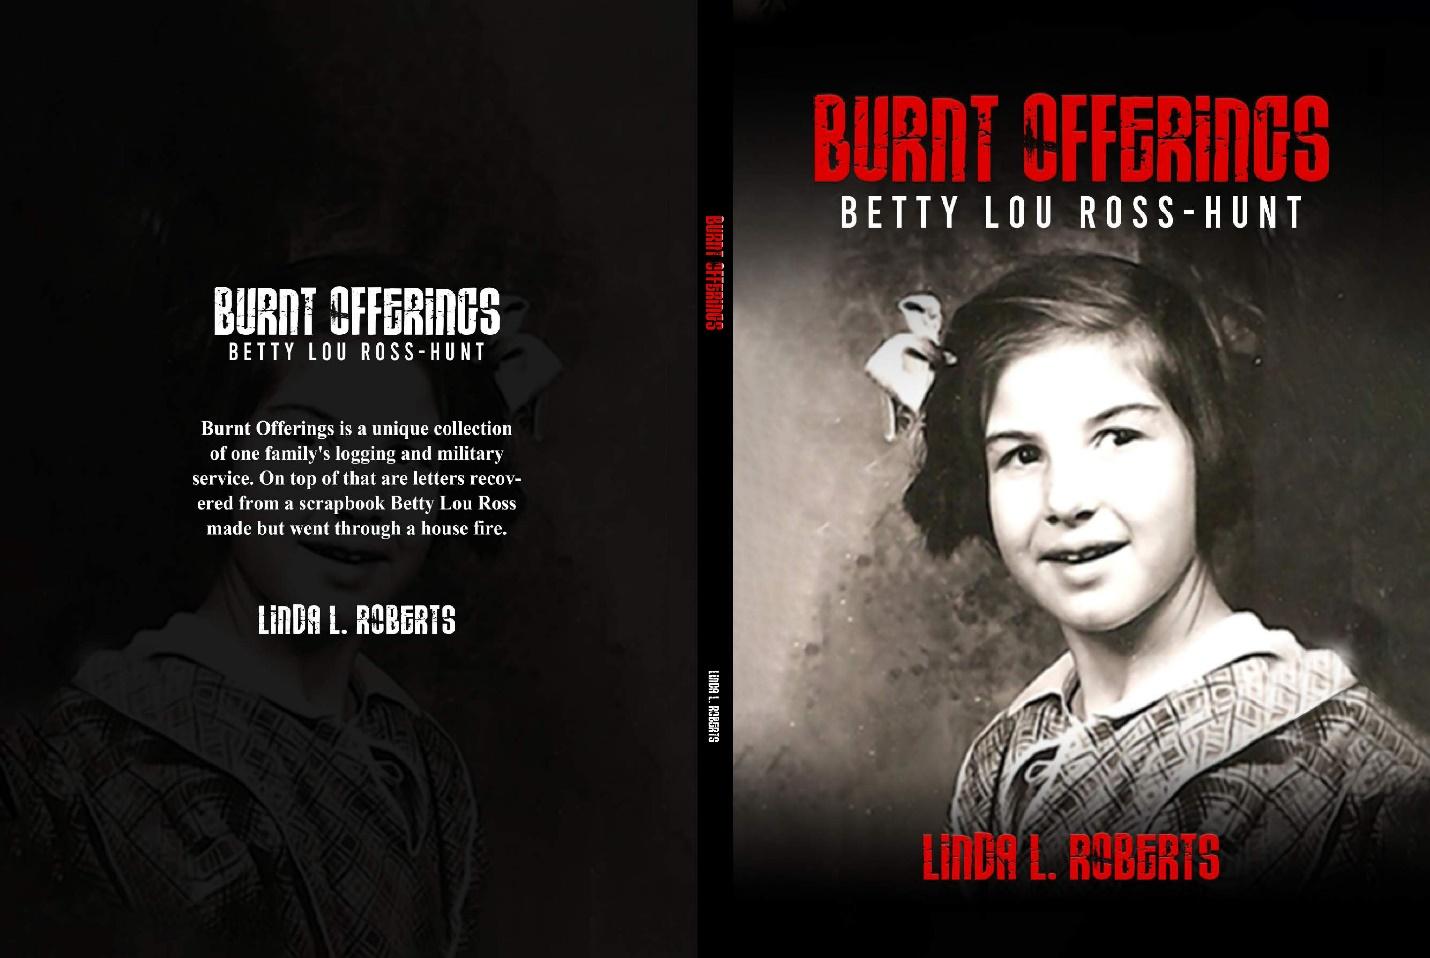 In the Heart of History: "The Scrap Book of Burnt Offerings" Unveils an Unforgettable Tale of Courage and Compassion